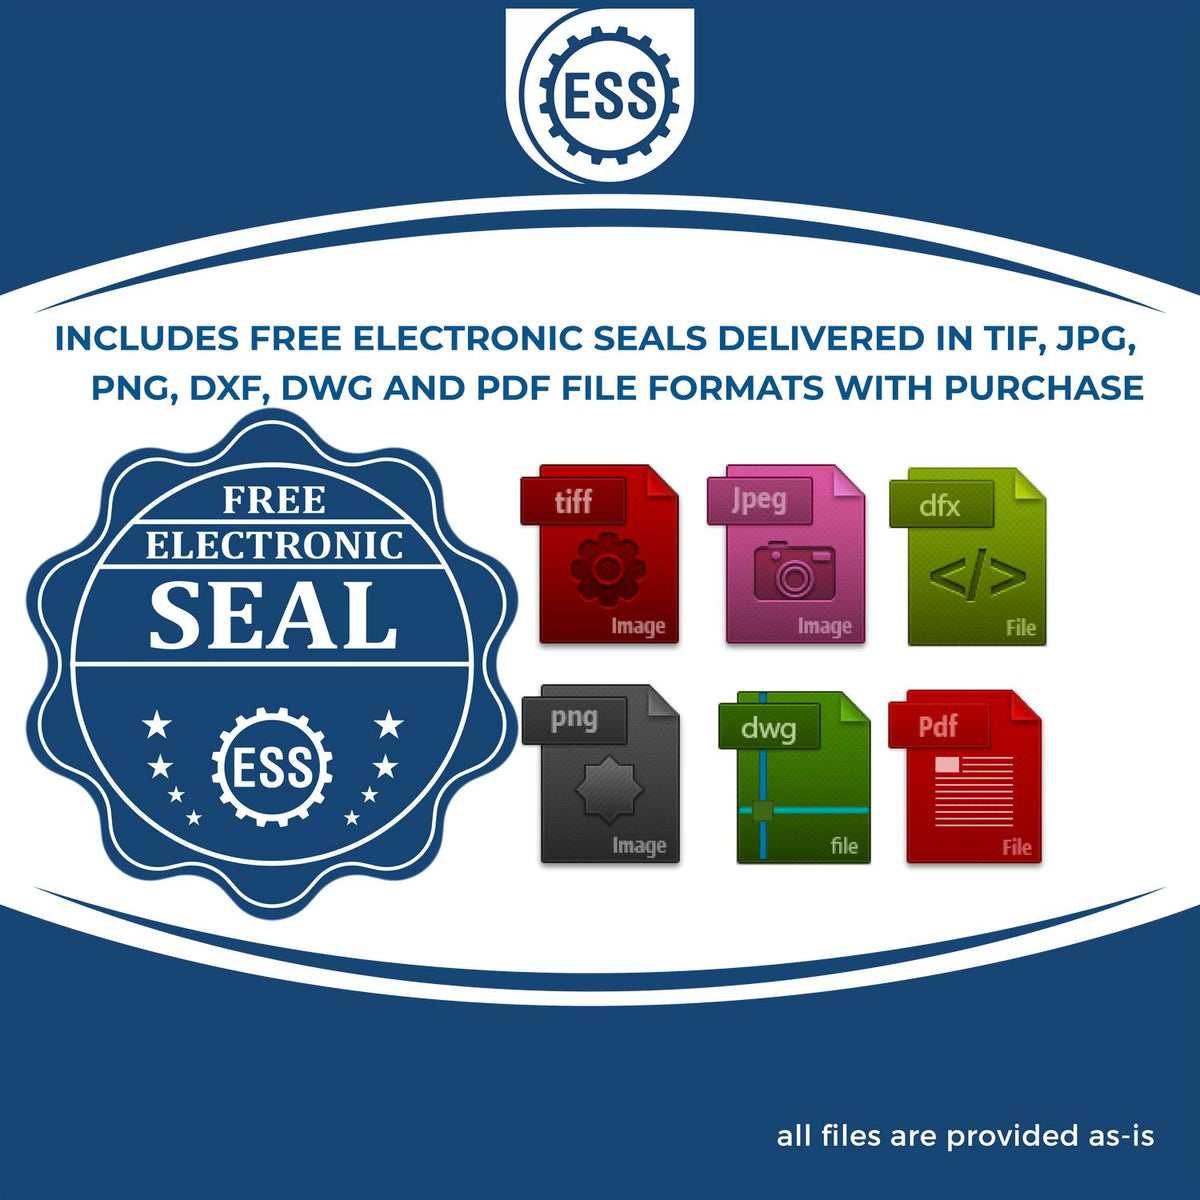 An infographic for the free electronic seal for the Slim Pre-Inked Maine Architect Seal Stamp illustrating the different file type icons such as DXF, DWG, TIF, JPG and PNG.